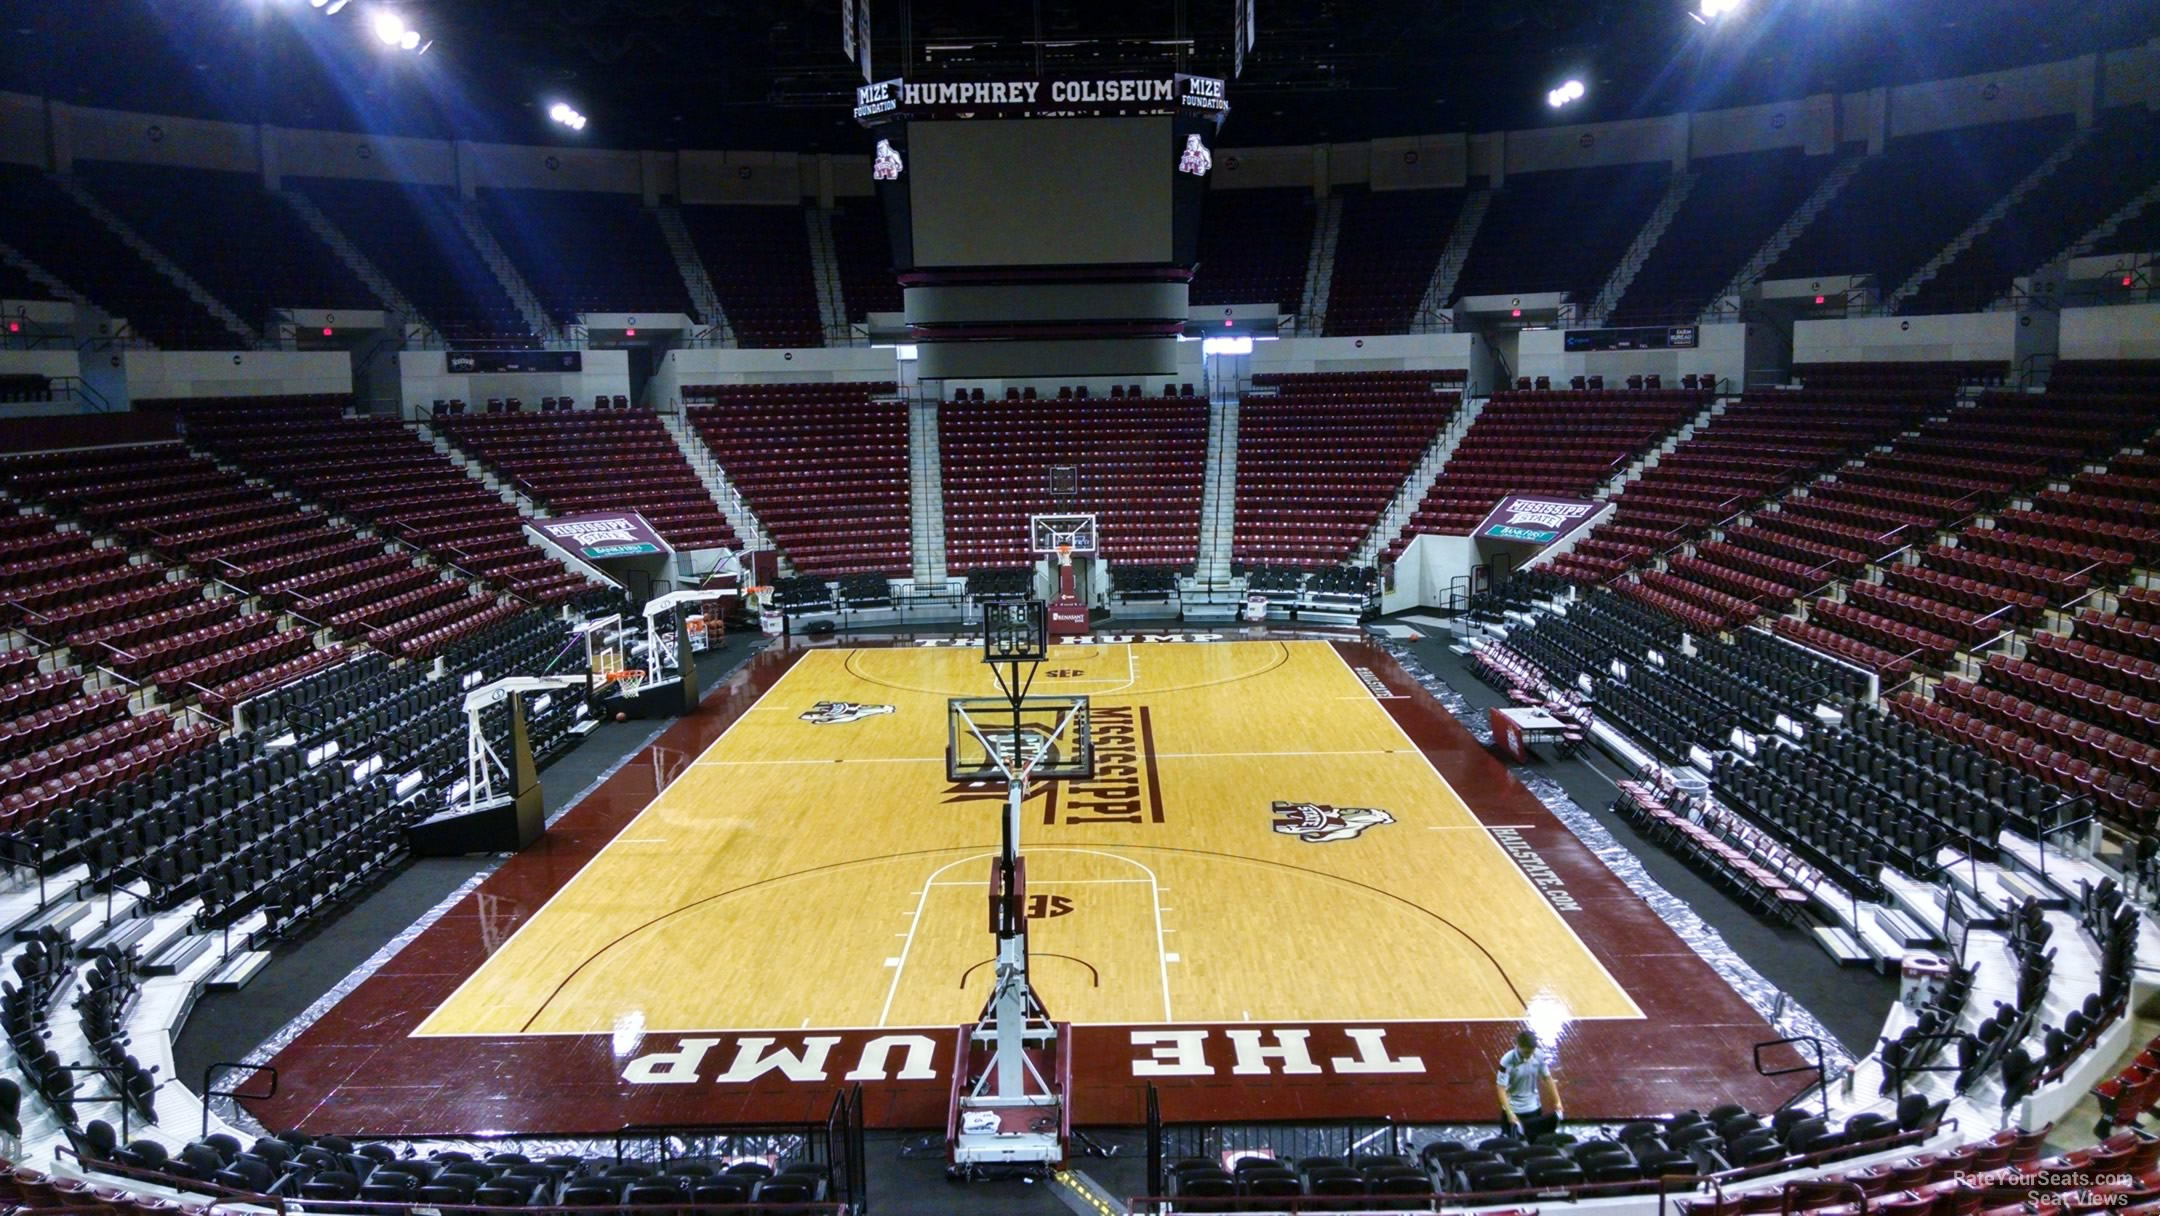 section 101, row 15 seat view  - humphrey coliseum